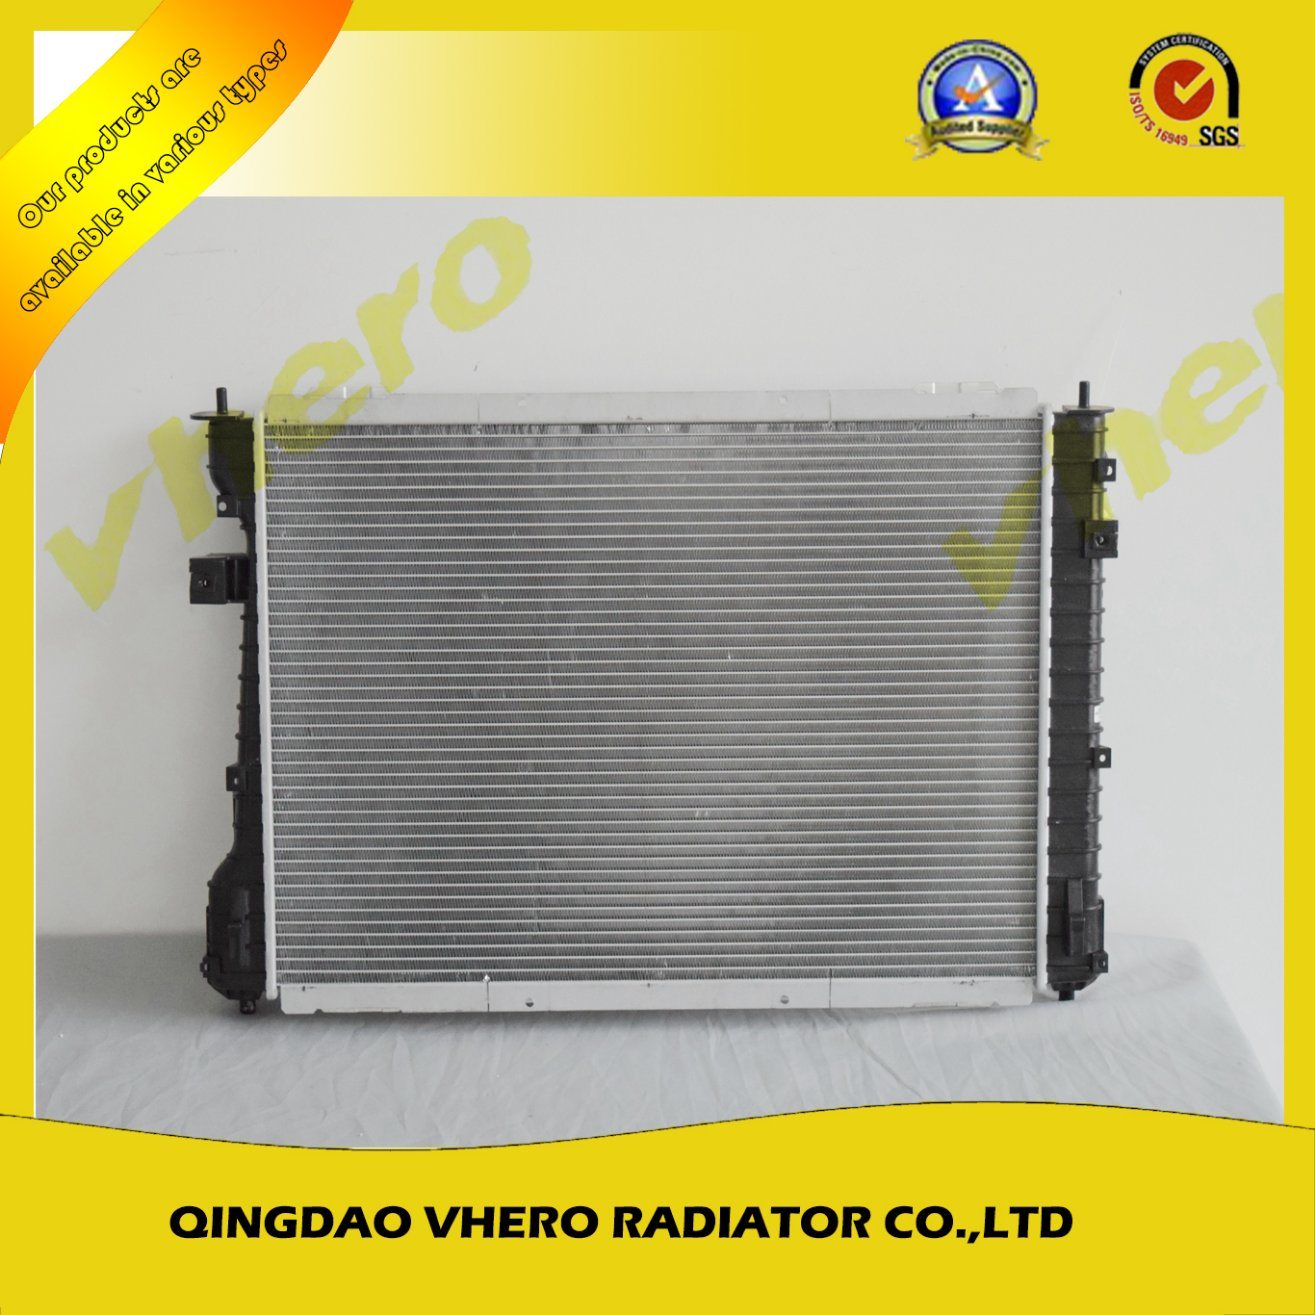 Cooling System Auto Aluminum Radiator for Ford Escape, Dpi: 13060/13040